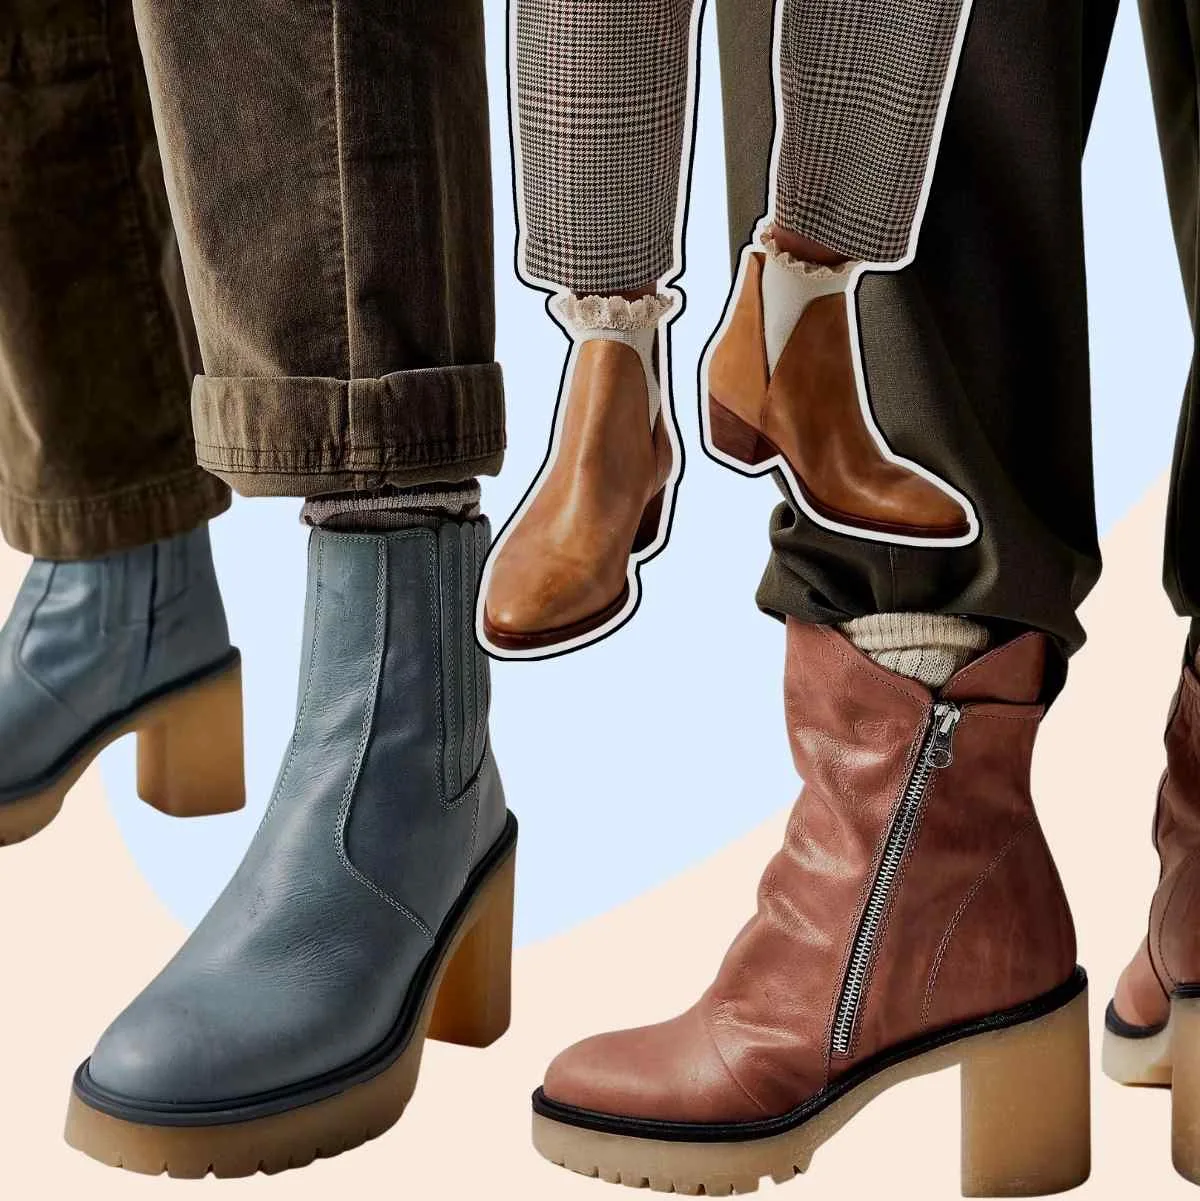 Collage of close ups of 3 women's feet wearing ankle boots with dress pants and socks styled in different ways.